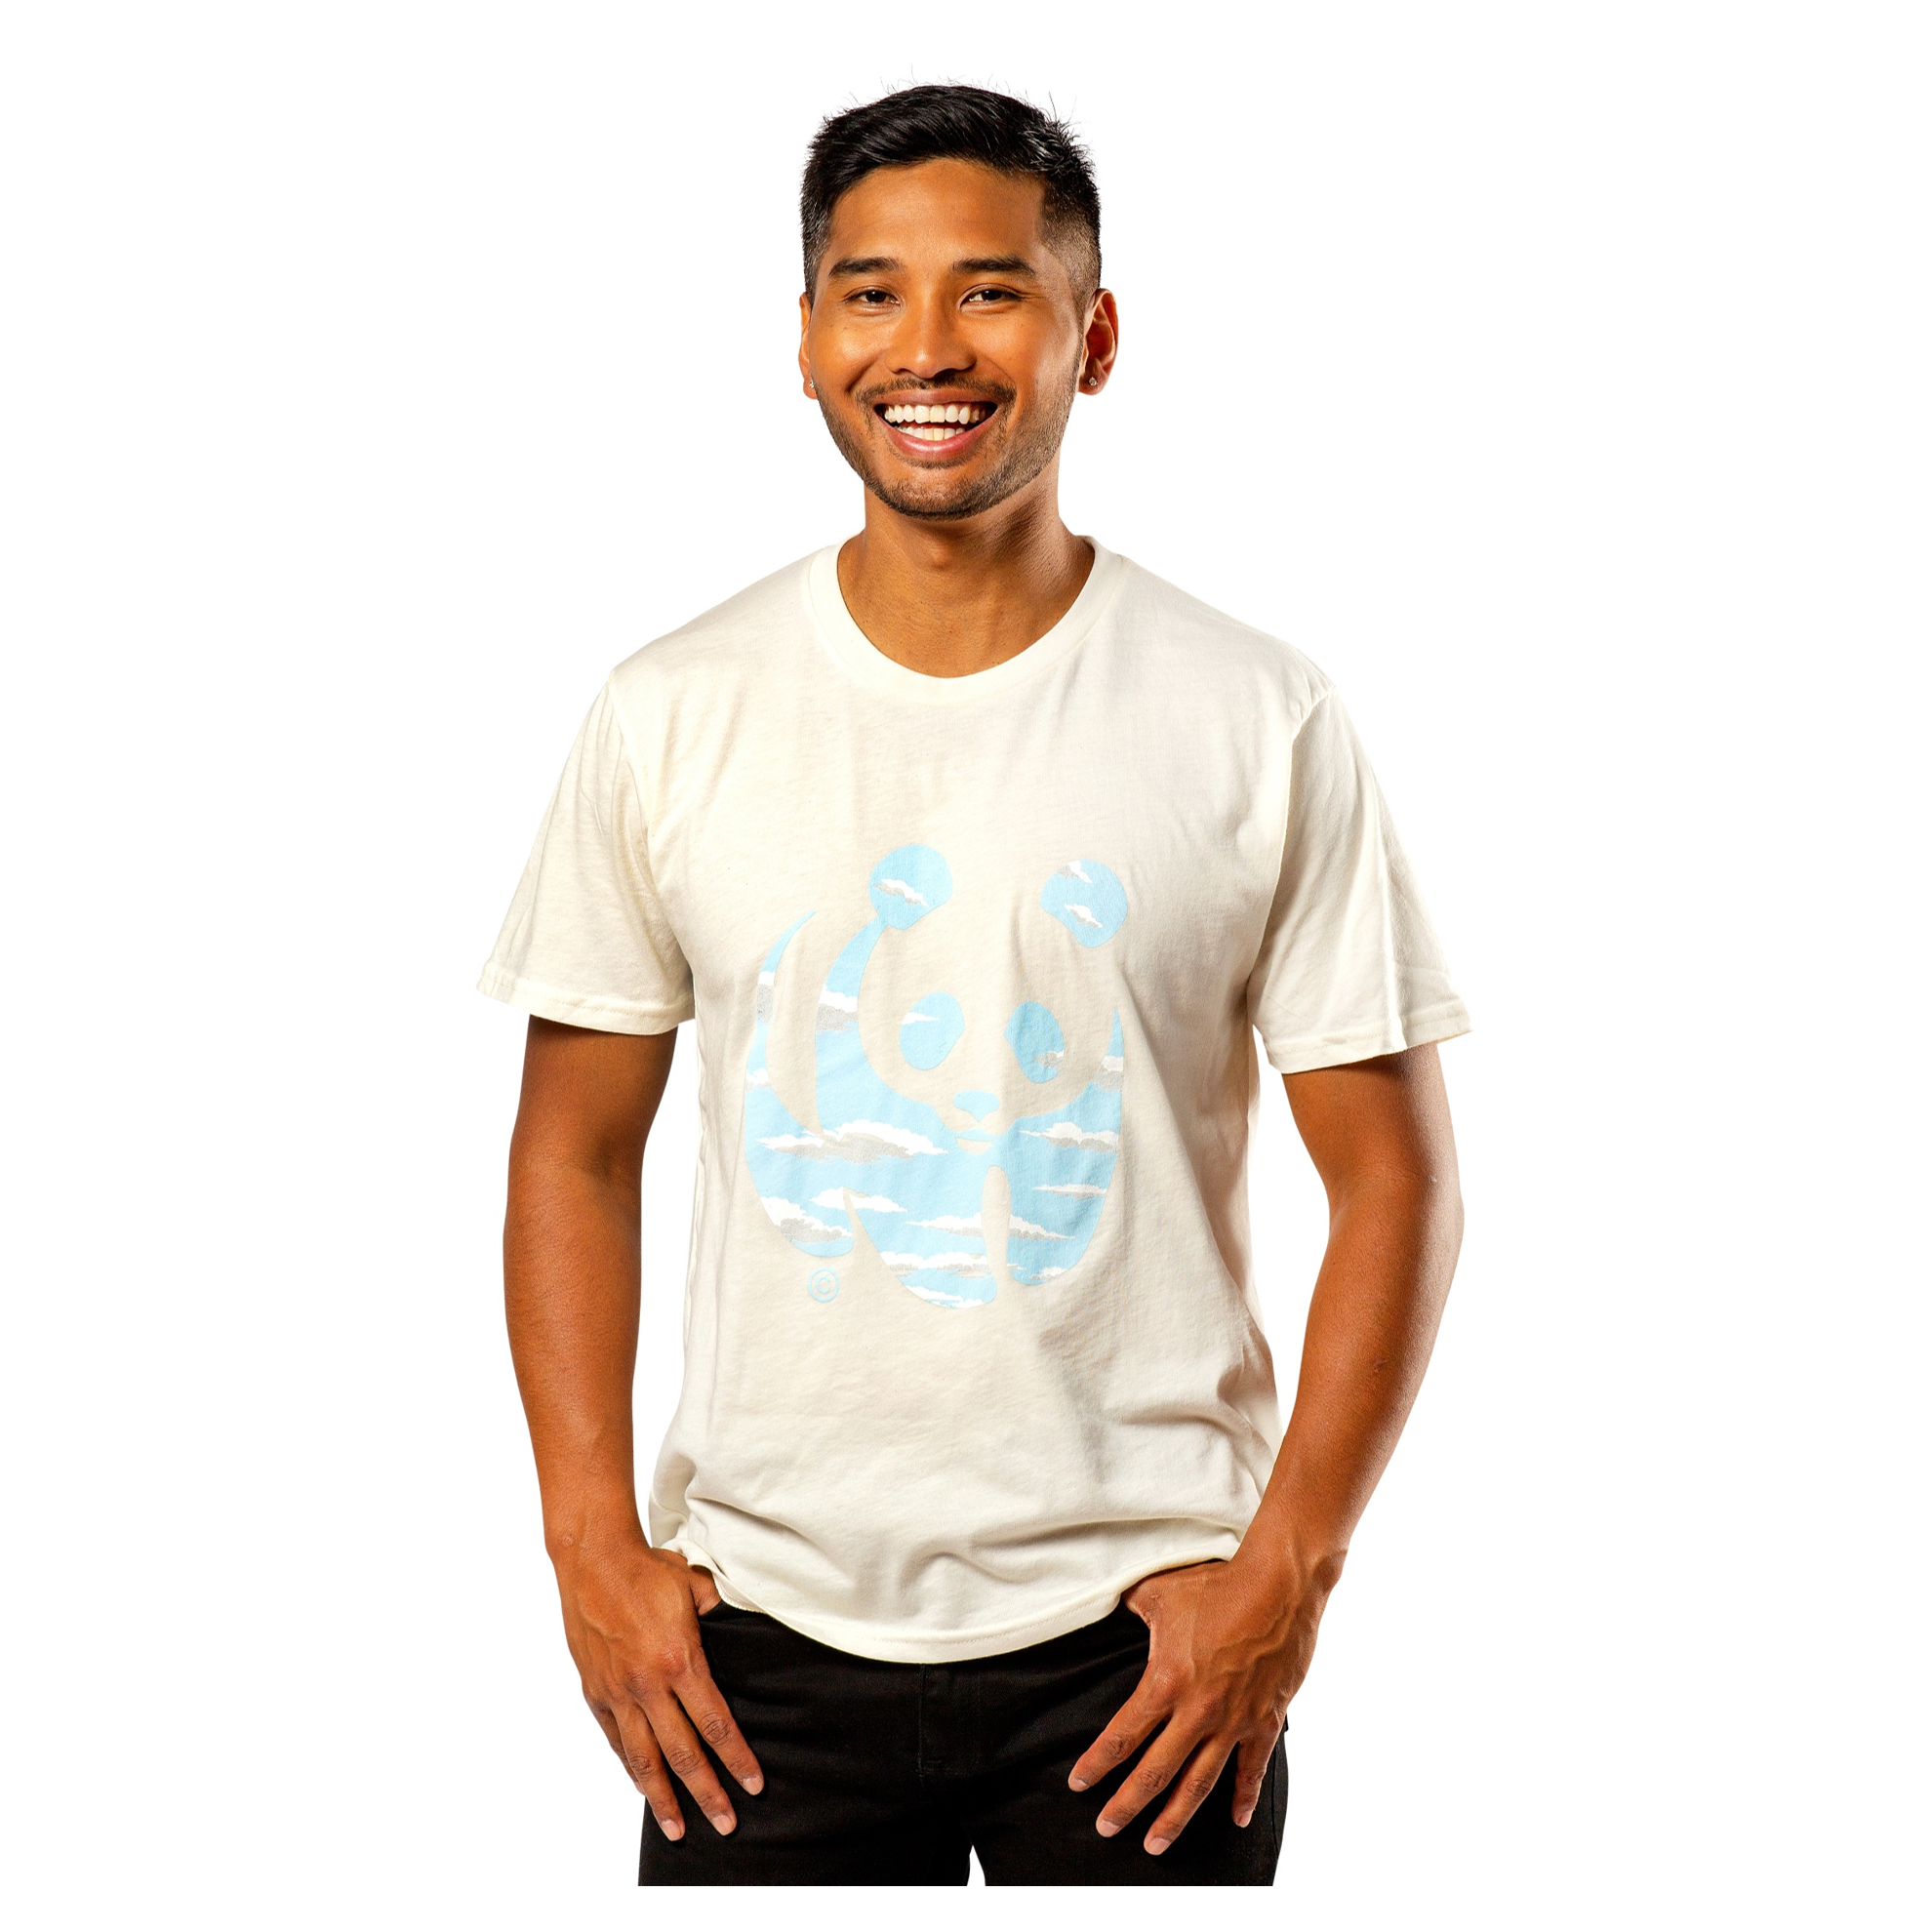 Male modeling the adult unisex cream t-shirt featuring the panda logo with cloud graphic